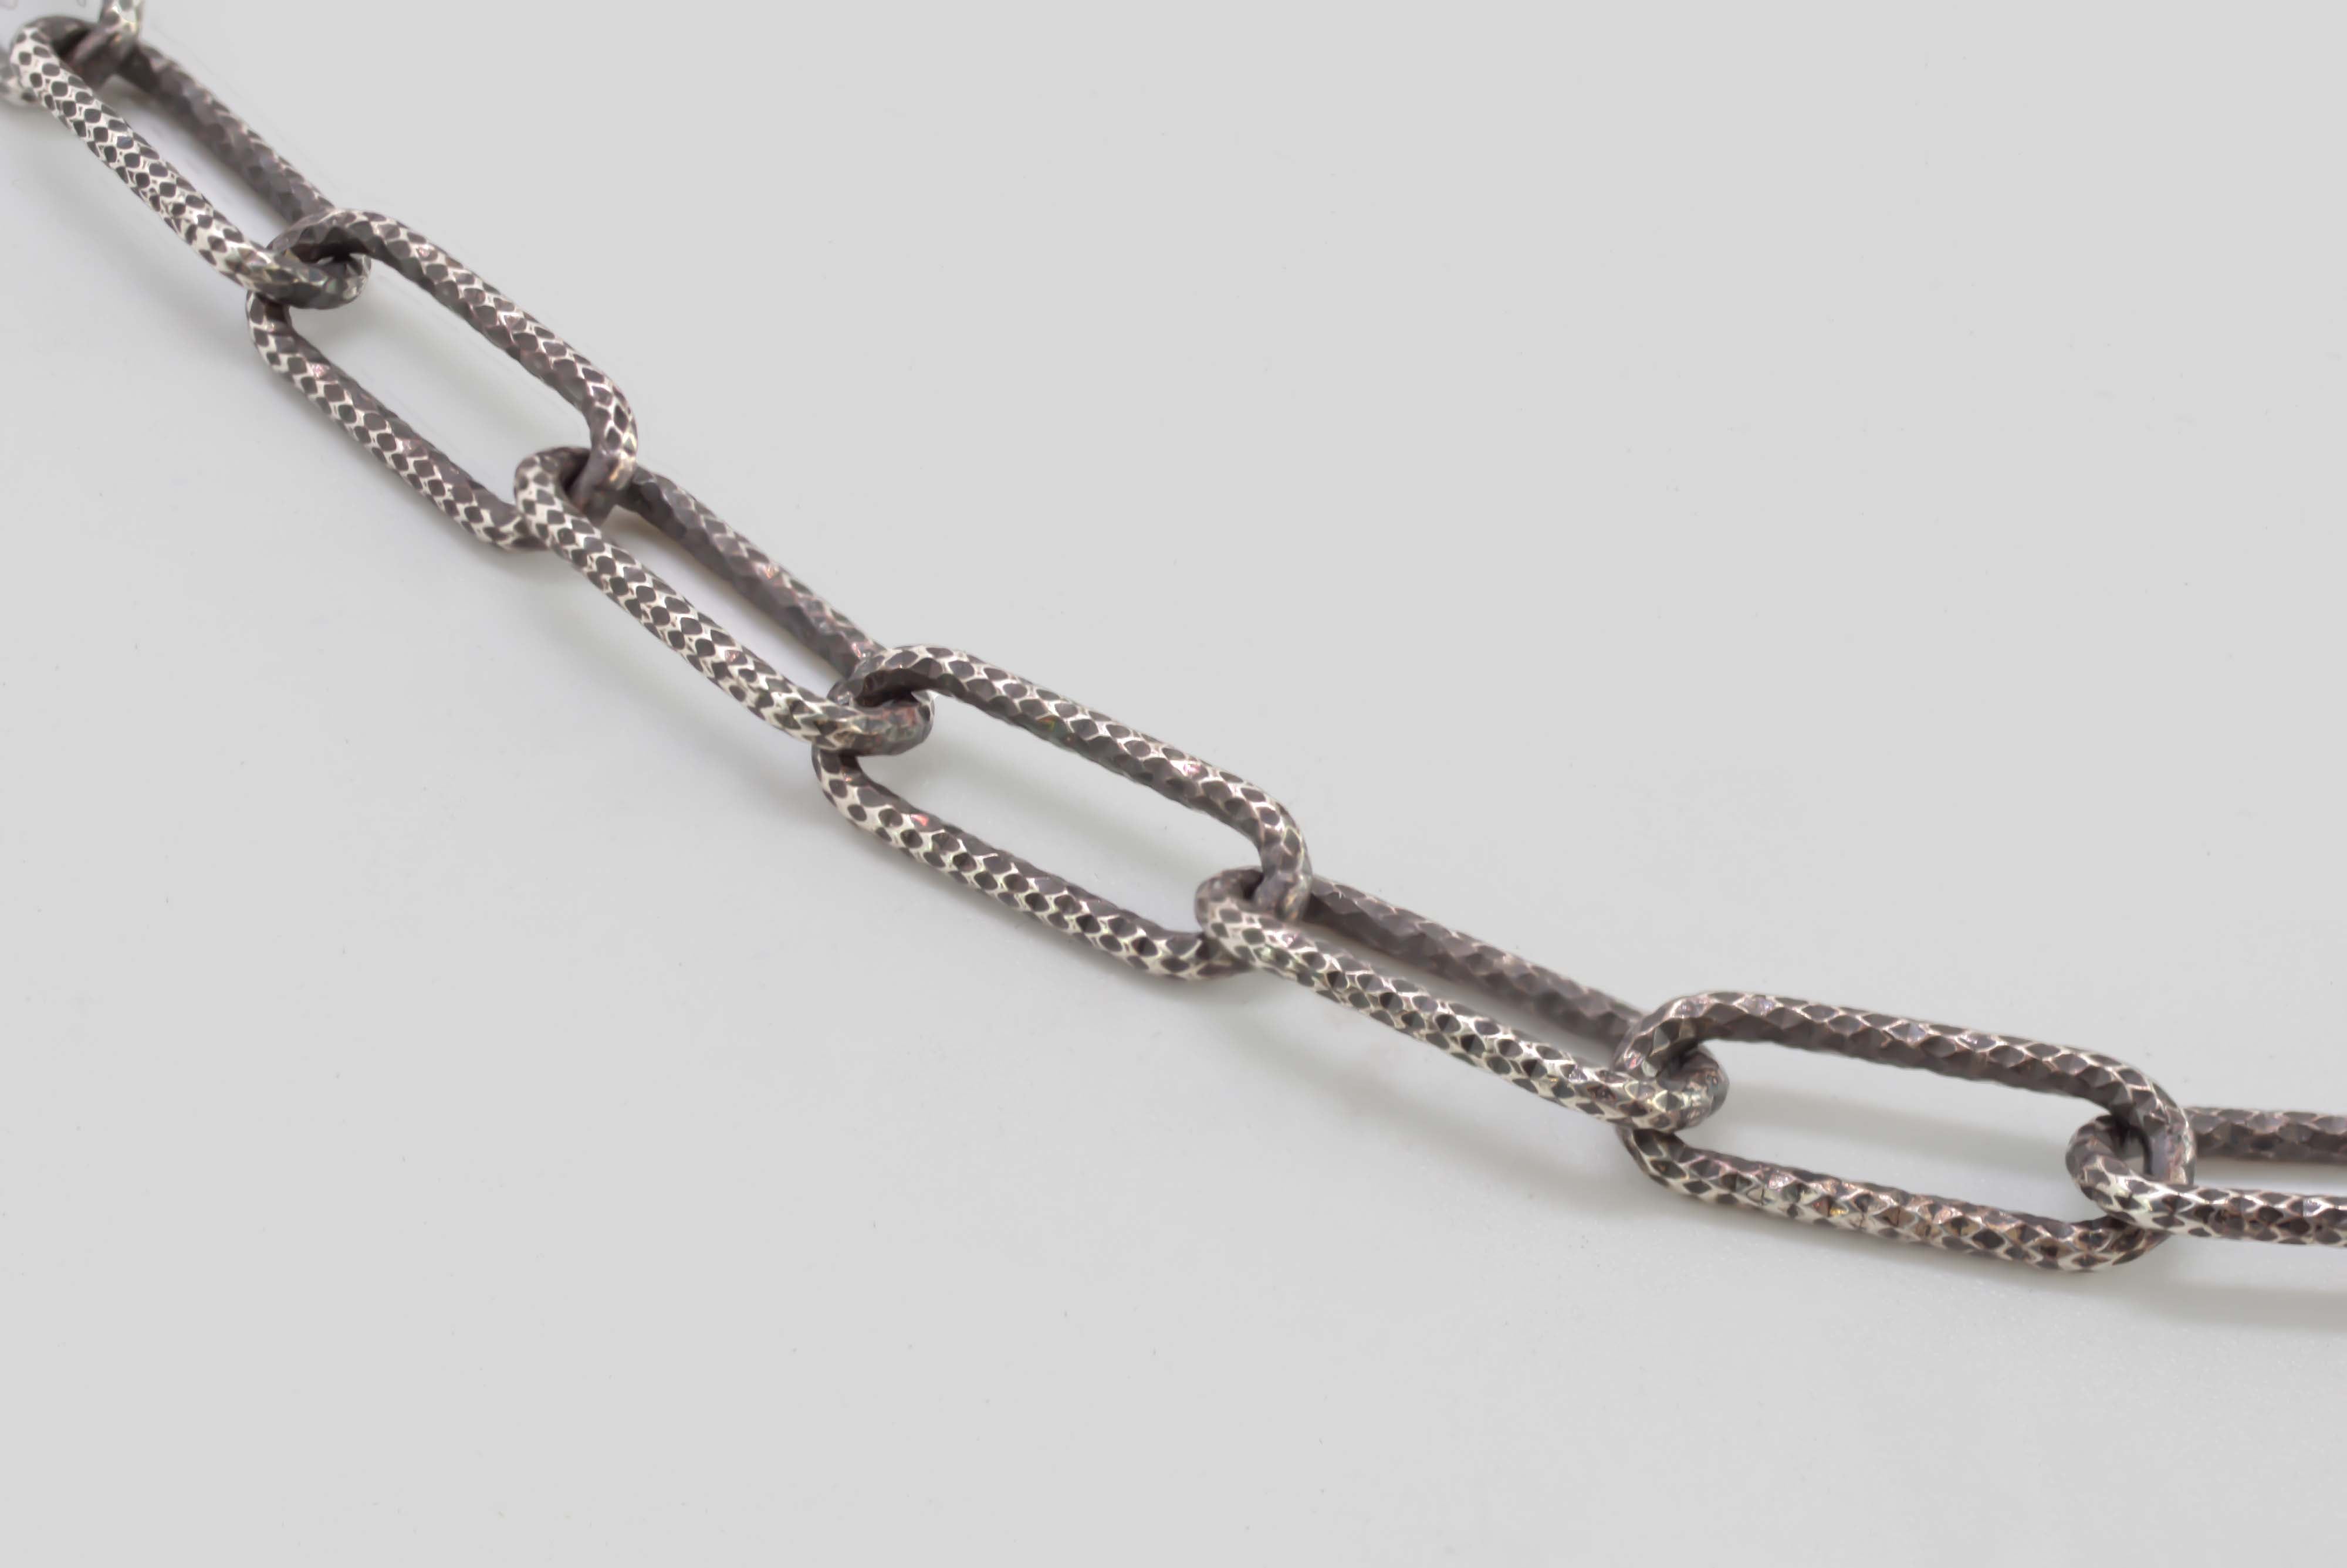 Antiqued & hammered large oval link chain made from sterling silver